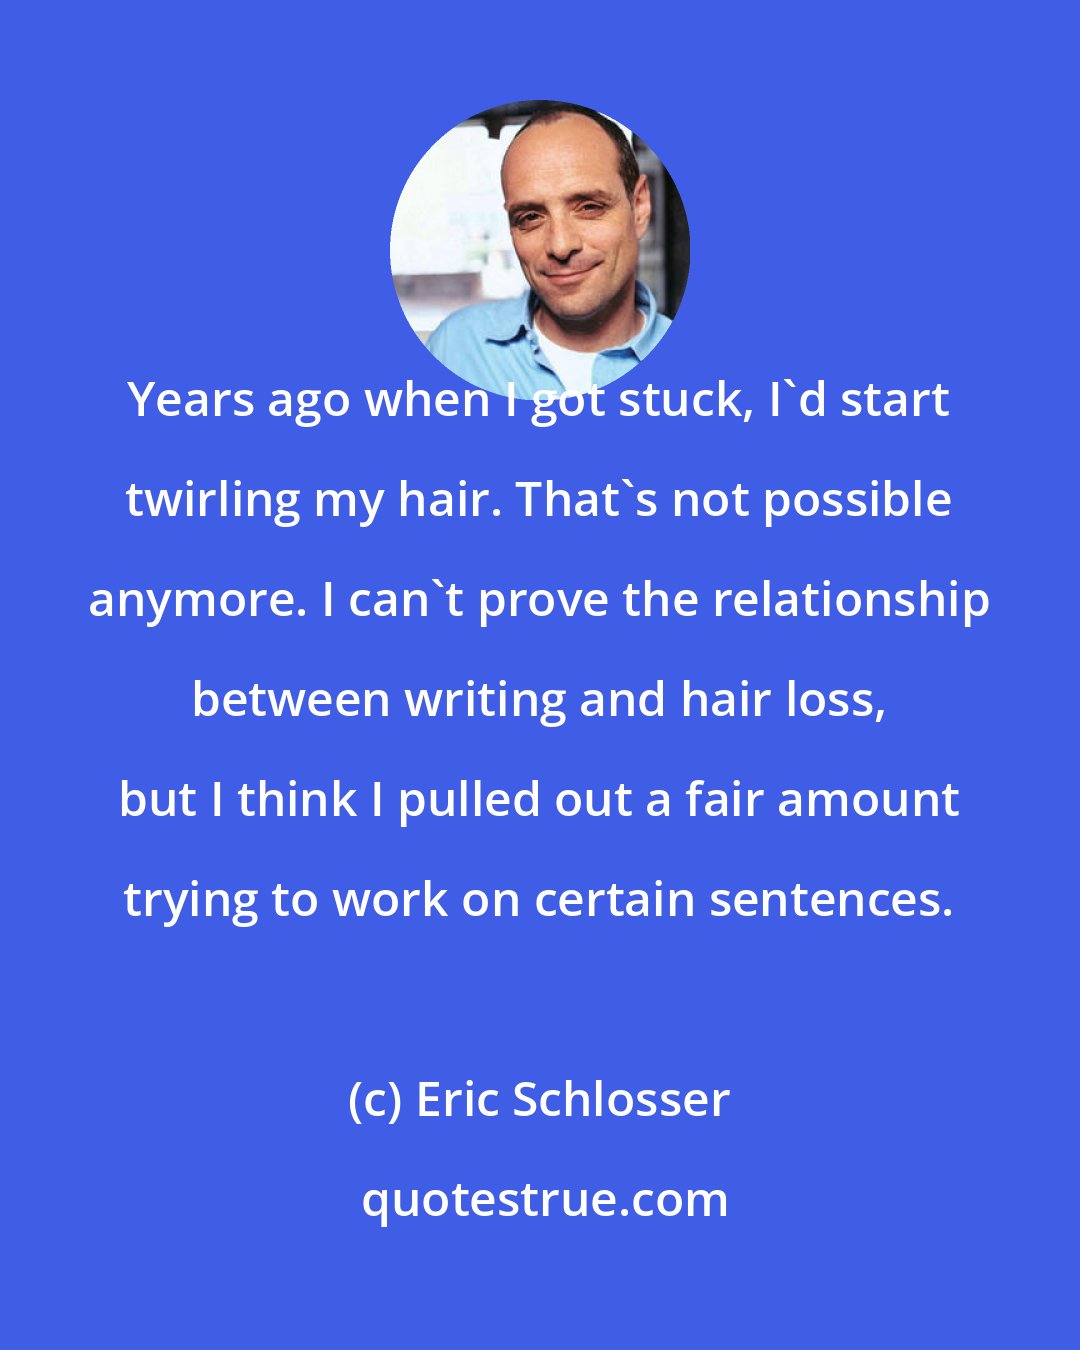 Eric Schlosser: Years ago when I got stuck, I'd start twirling my hair. That's not possible anymore. I can't prove the relationship between writing and hair loss, but I think I pulled out a fair amount trying to work on certain sentences.